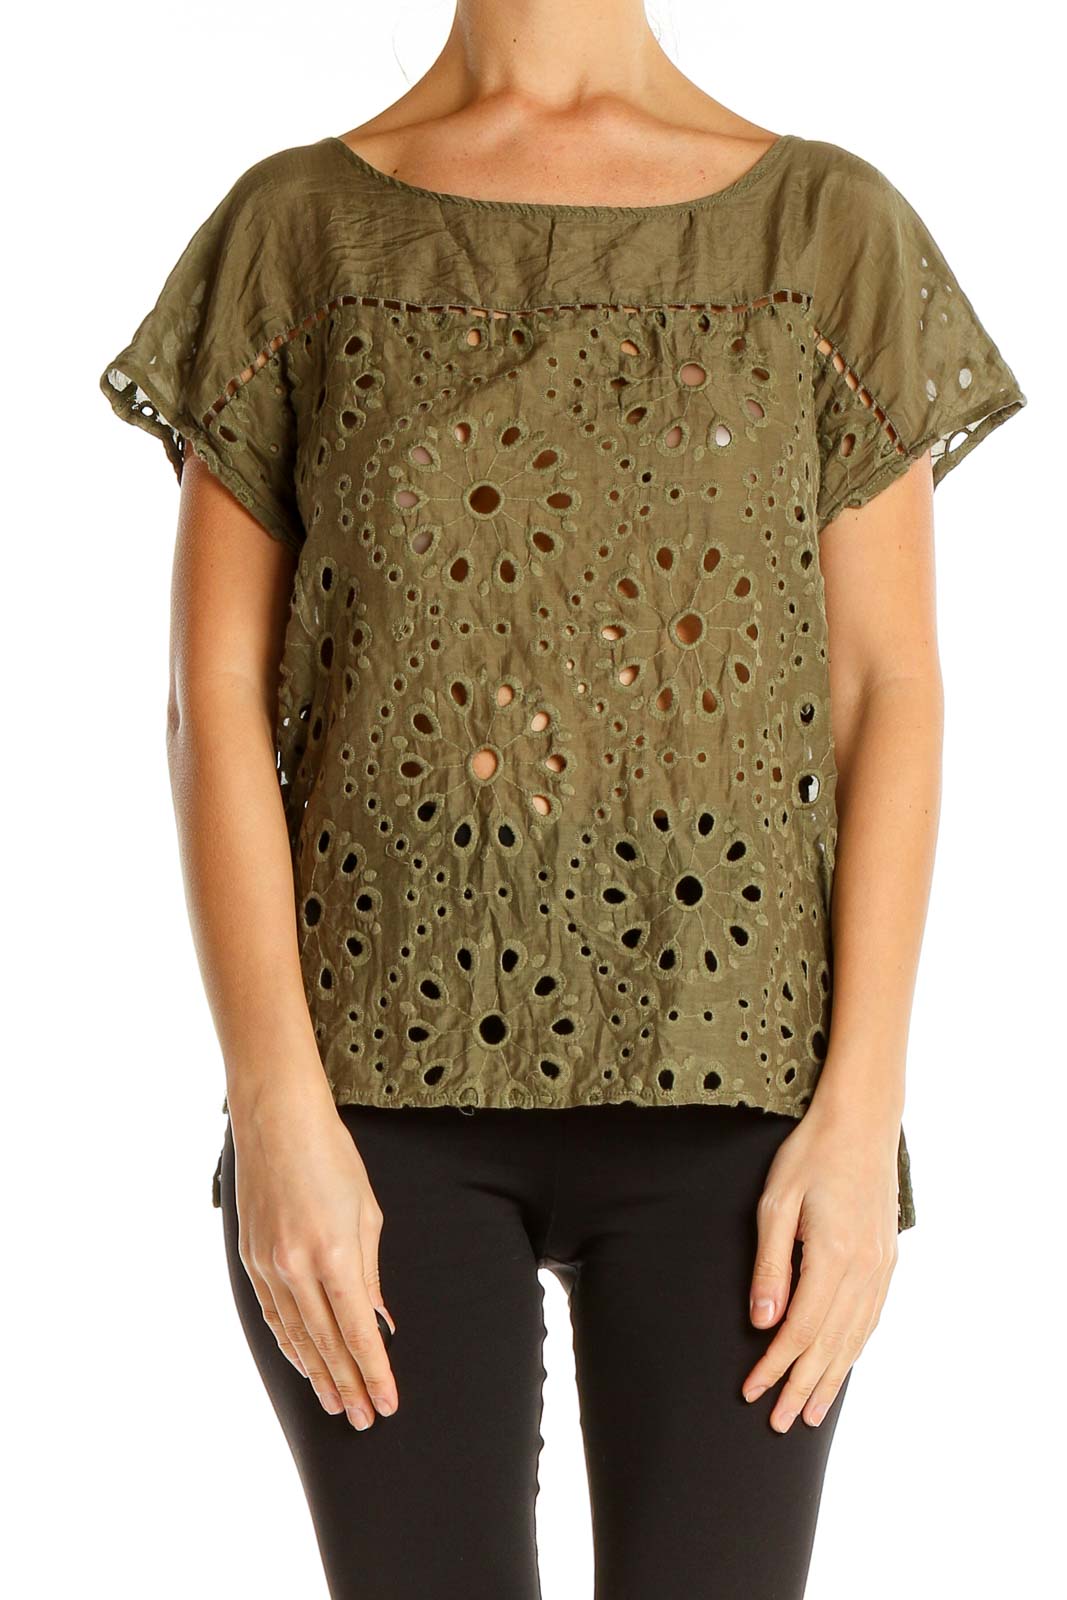 Brown Eyelet Chic Blouse Front